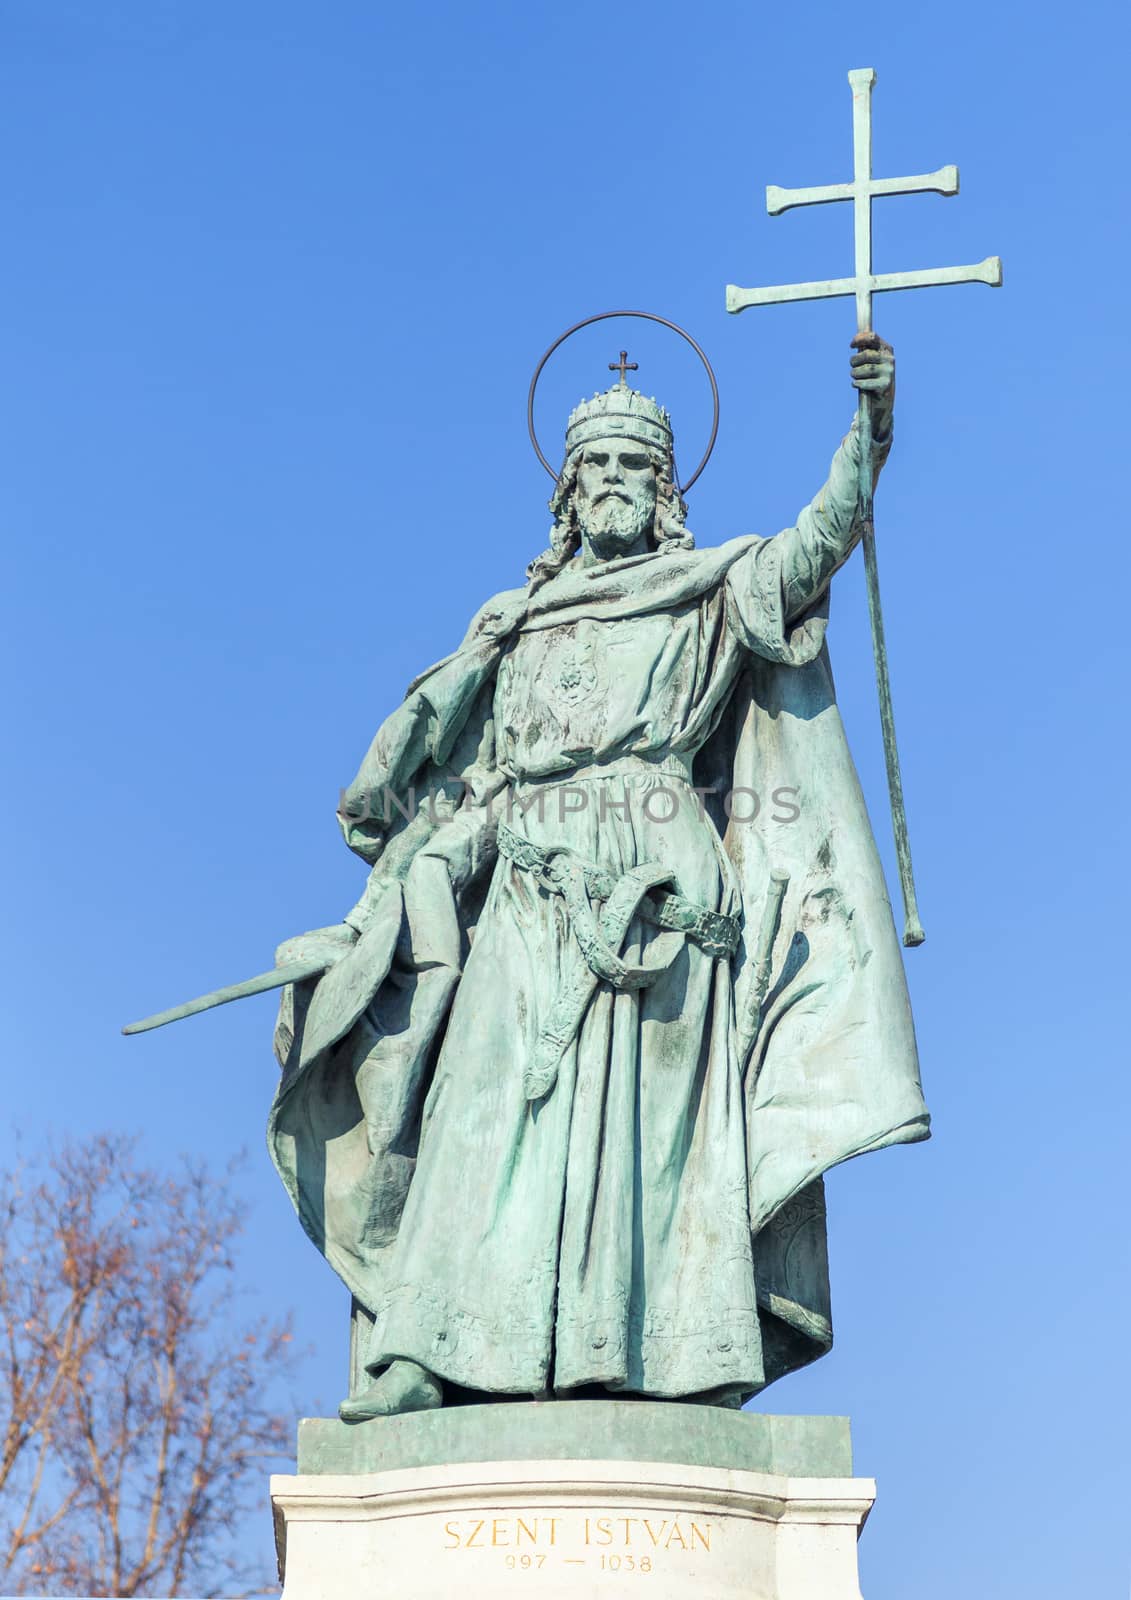 Budapest, HUNGARY - FEBRUARY 15, 2015 - Statue of saint Istvan in Hero's Square, Budapest by Goodday